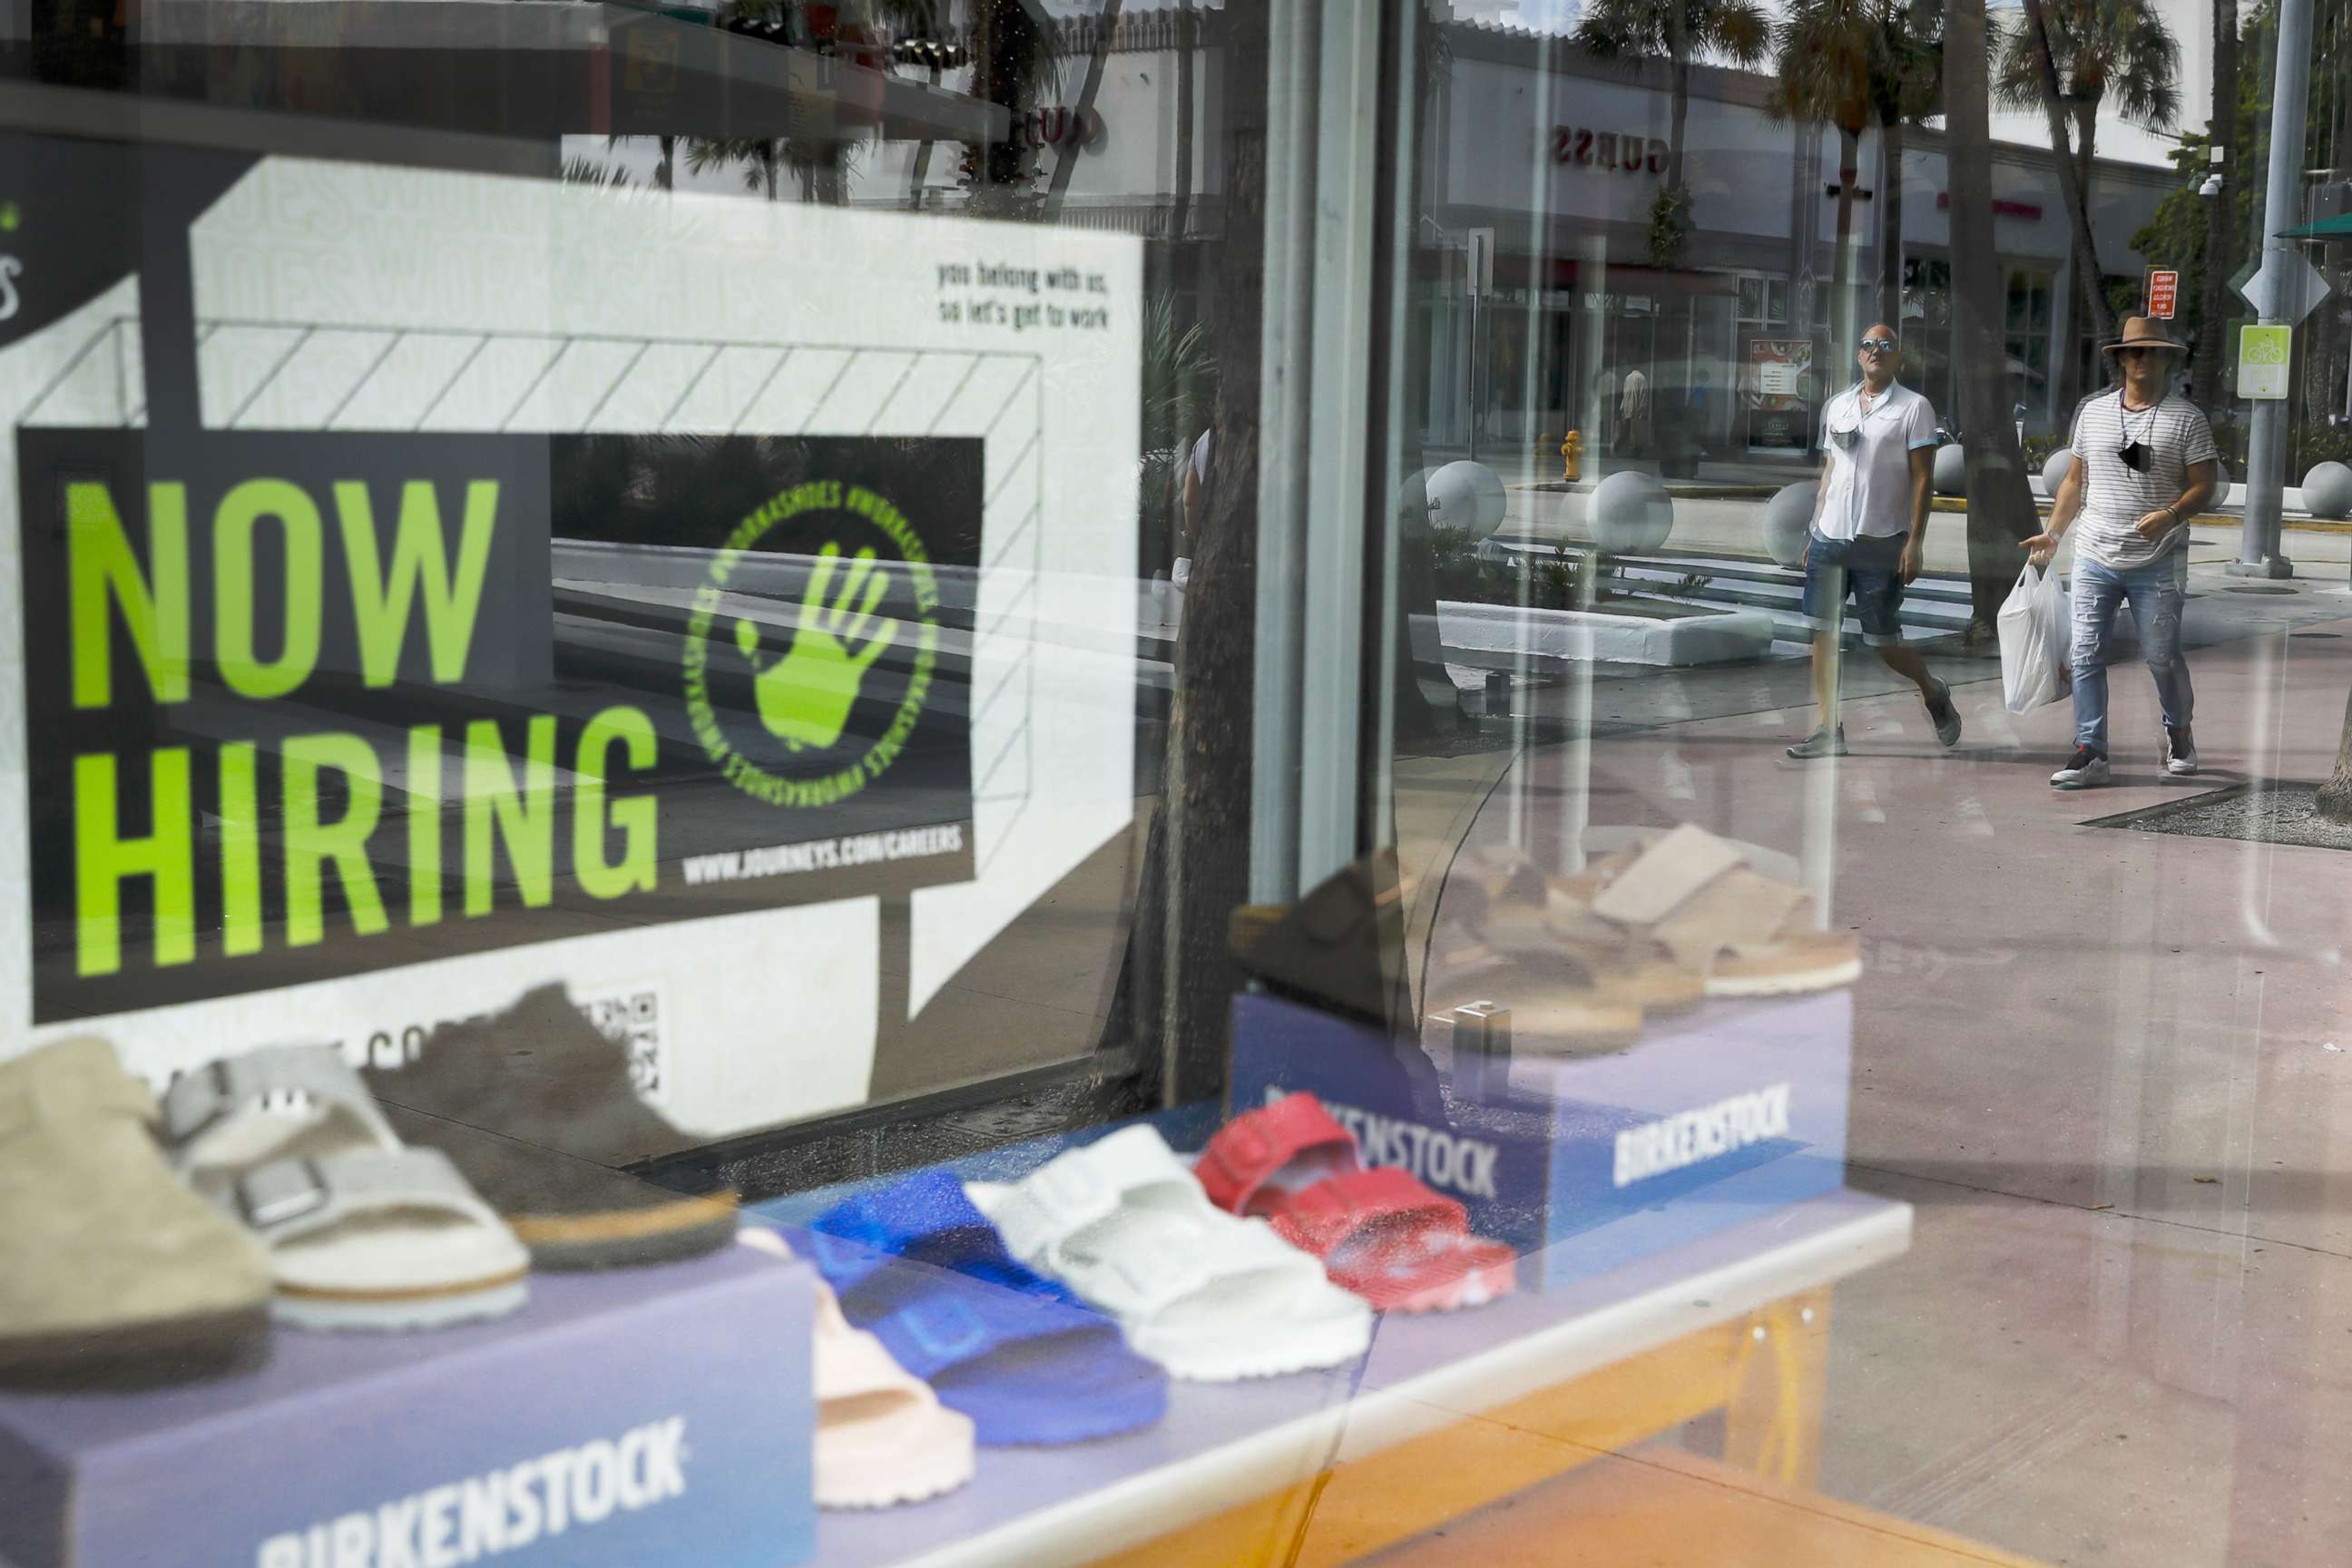 PHOTO: A sign advertising "Now Hiring" outside a shoe store in Miami, Oct. 23, 2021.